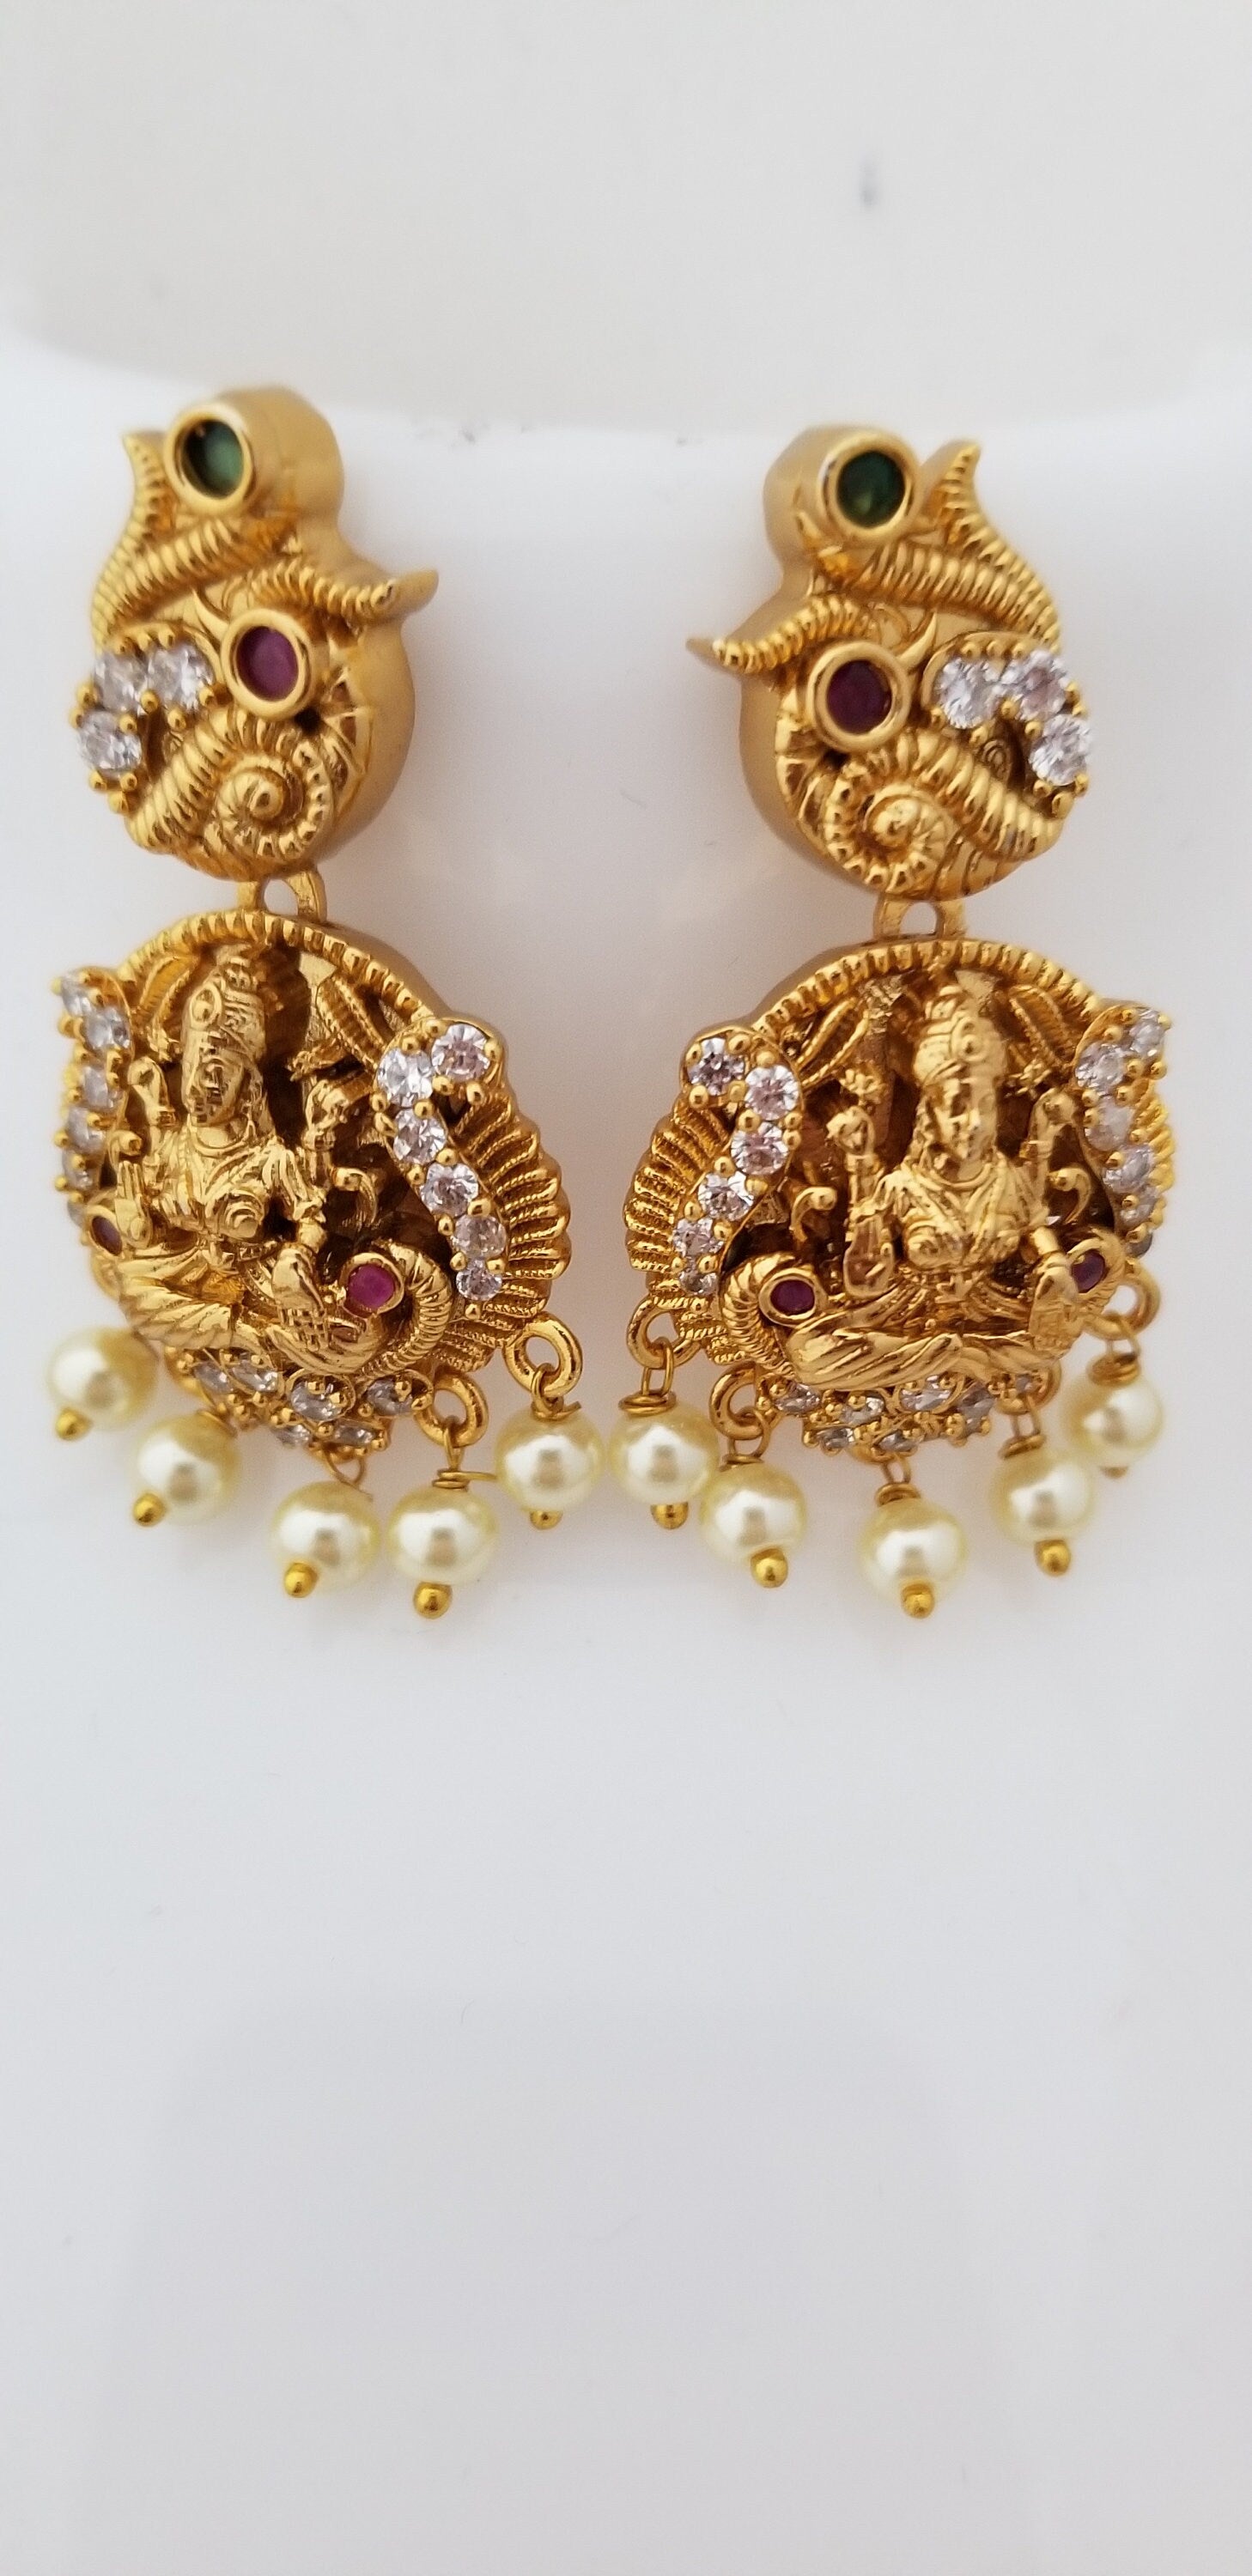 Premium Quality Lakshmi matte finish middle Haram with Beautiful Earrings - Temple Jewelry